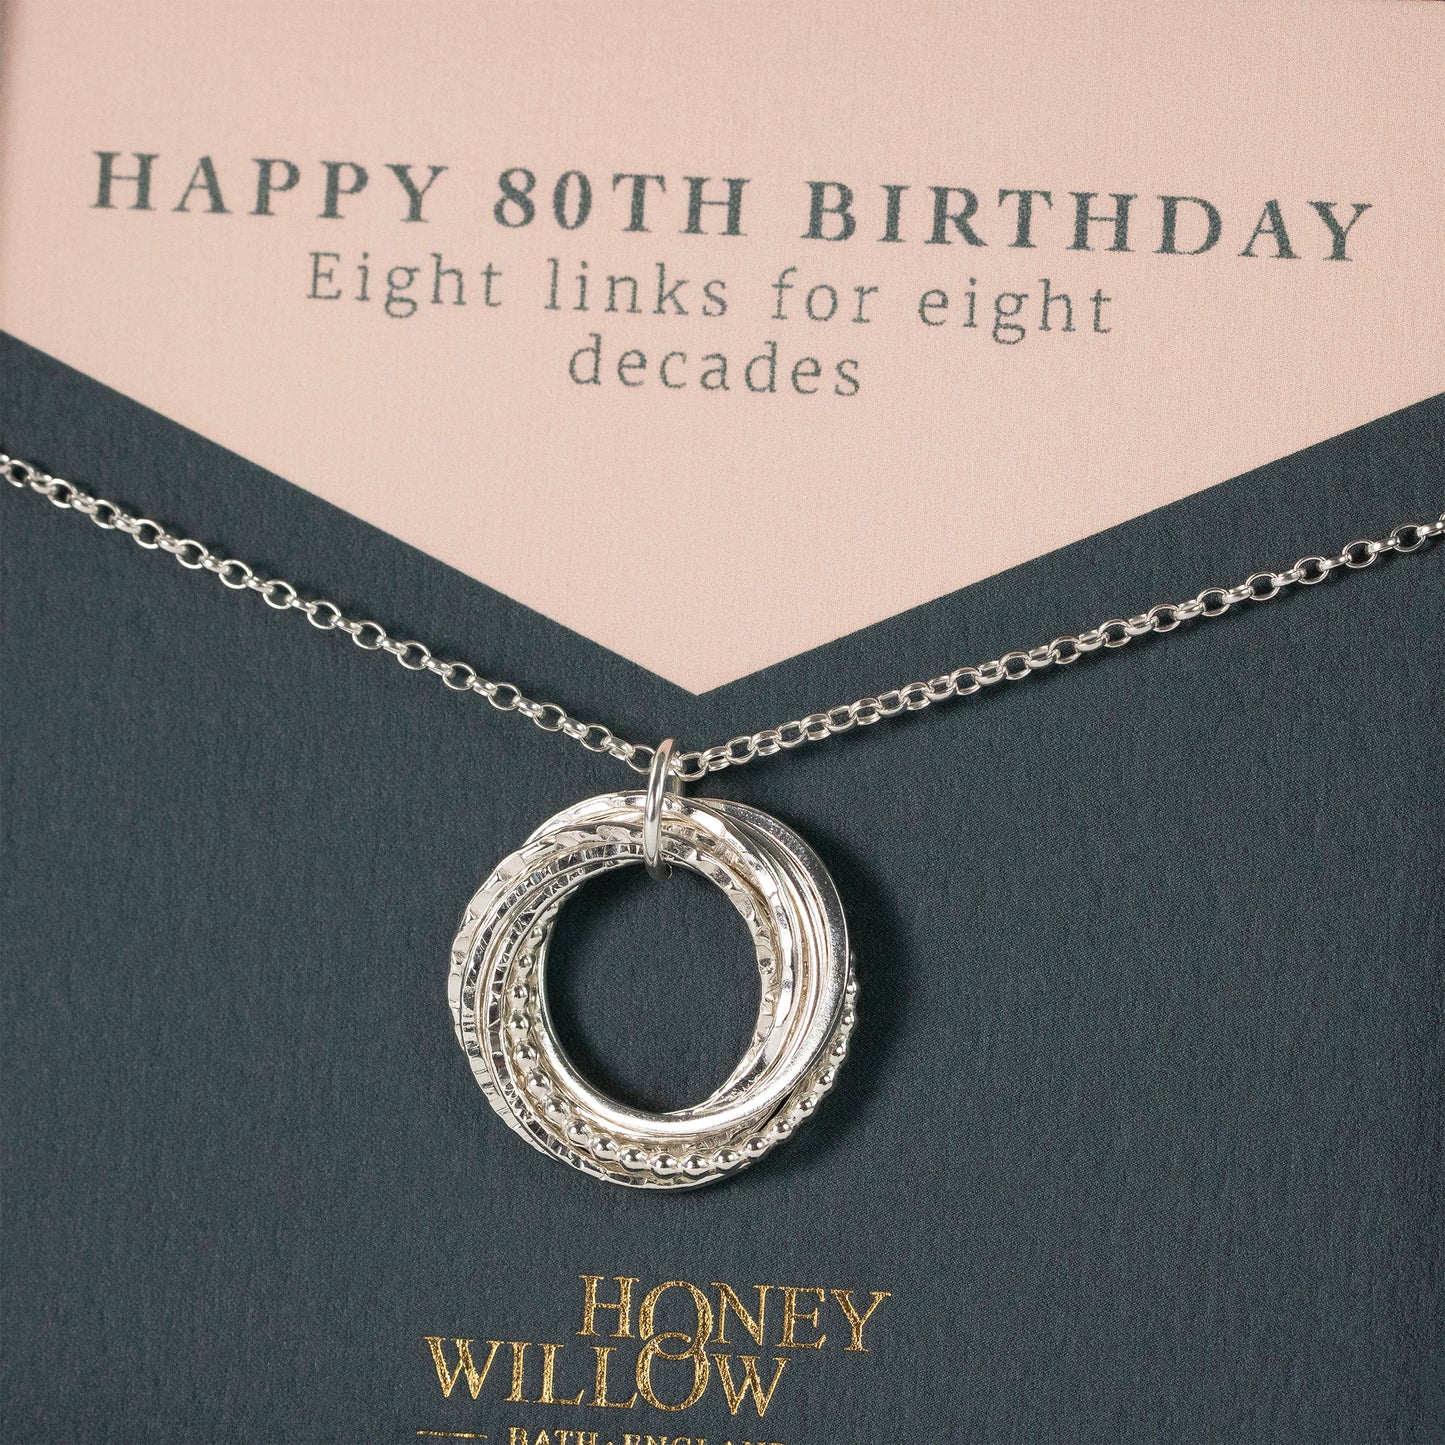 80th Birthday Necklace - The Original 8 Links for 8 Decades Necklace - Silver